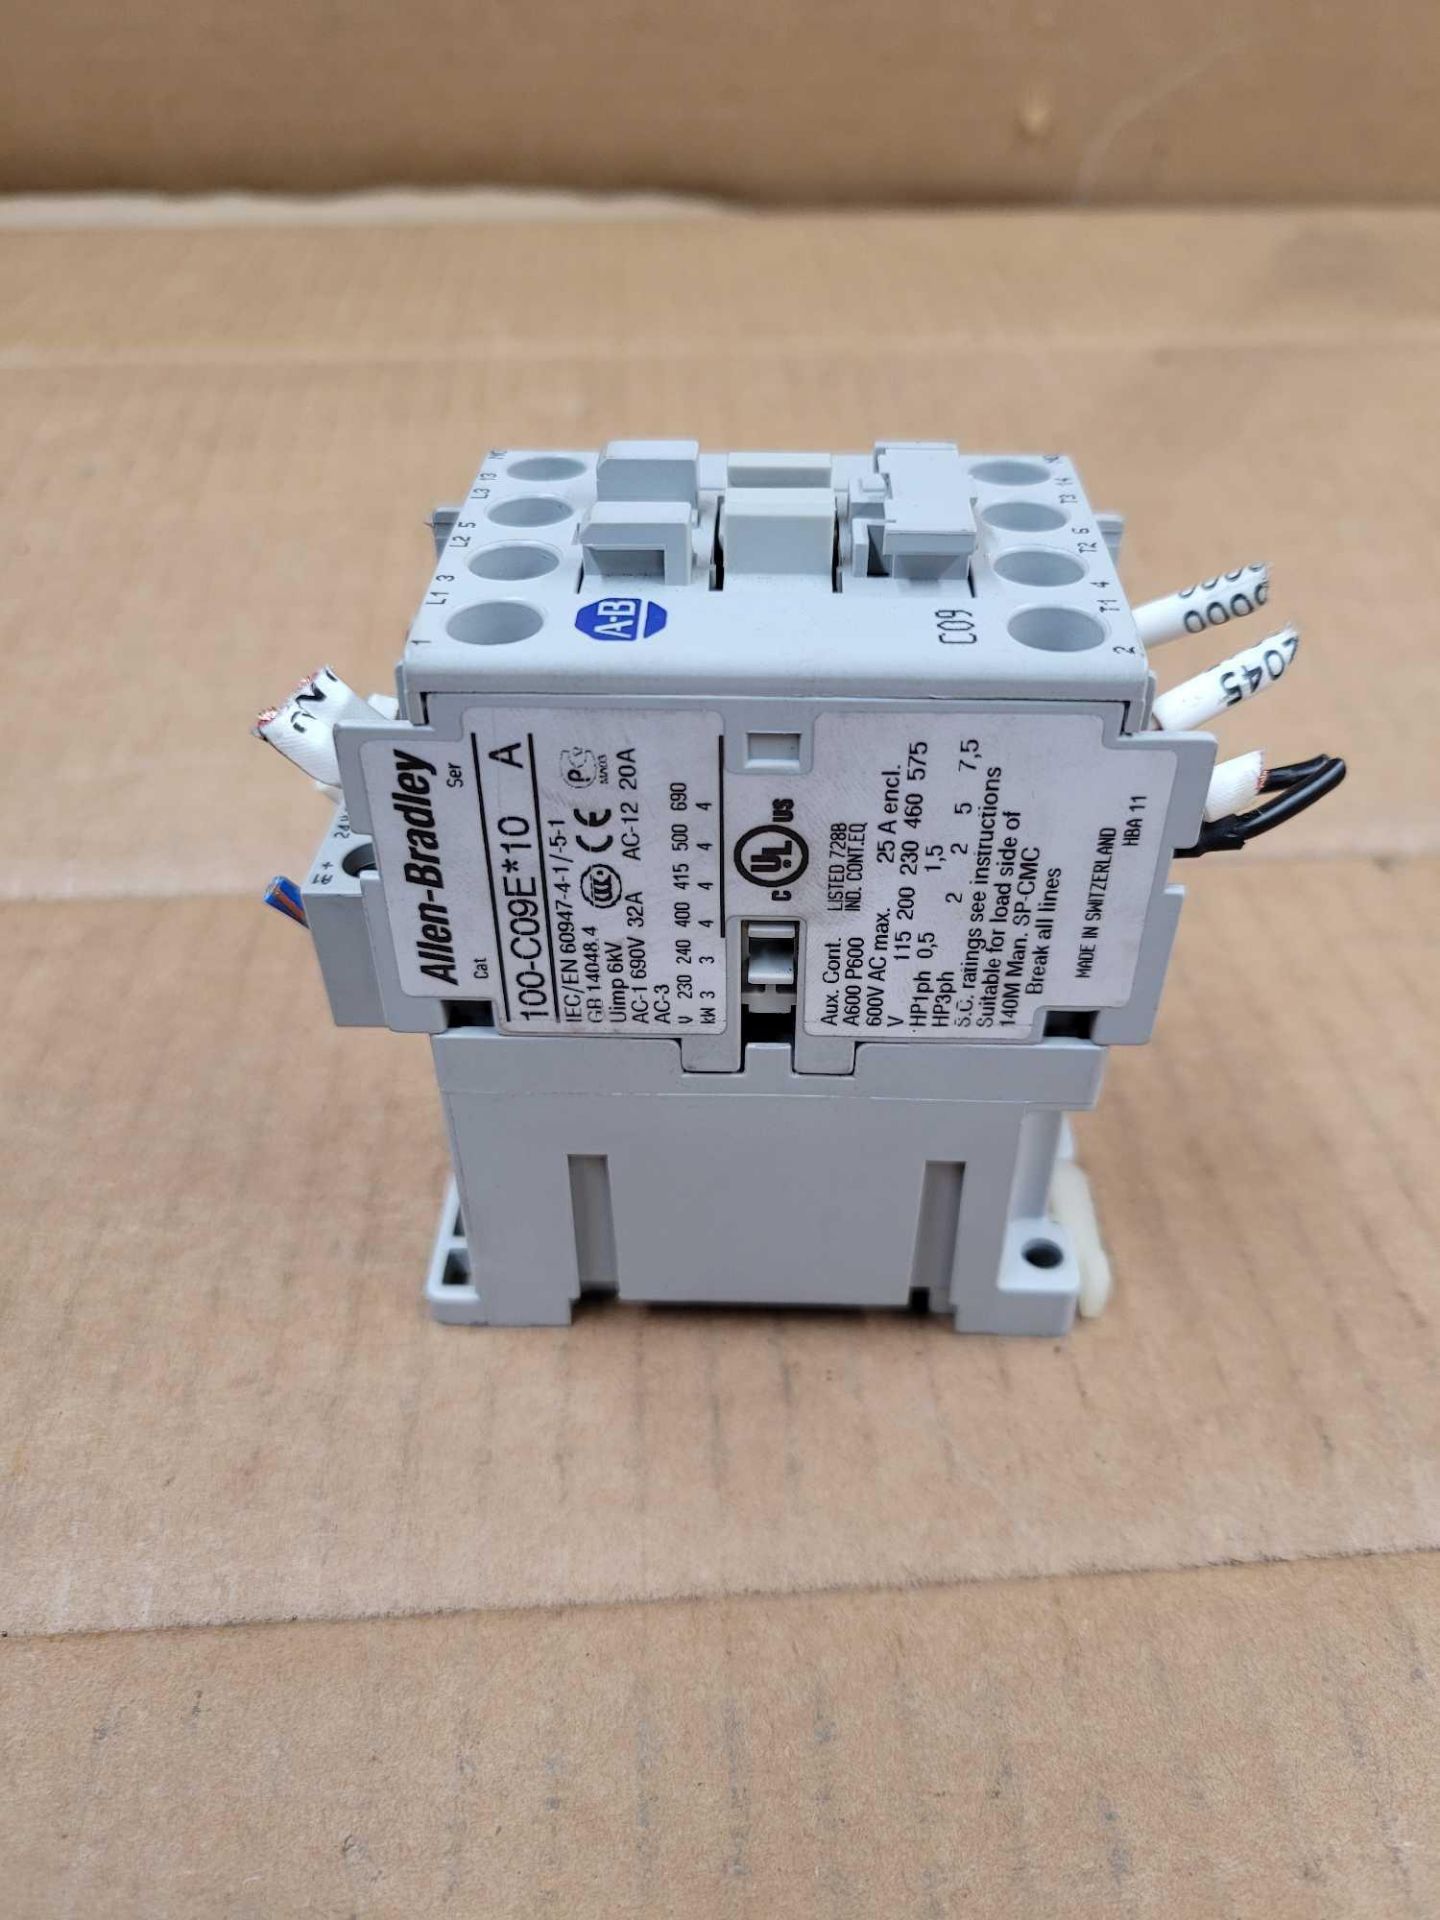 LOT OF 5 ALLEN BRADLEY 100-C09E*10 / Series A Contactor  /  Lot Weight: 4.4 lbs - Image 6 of 9